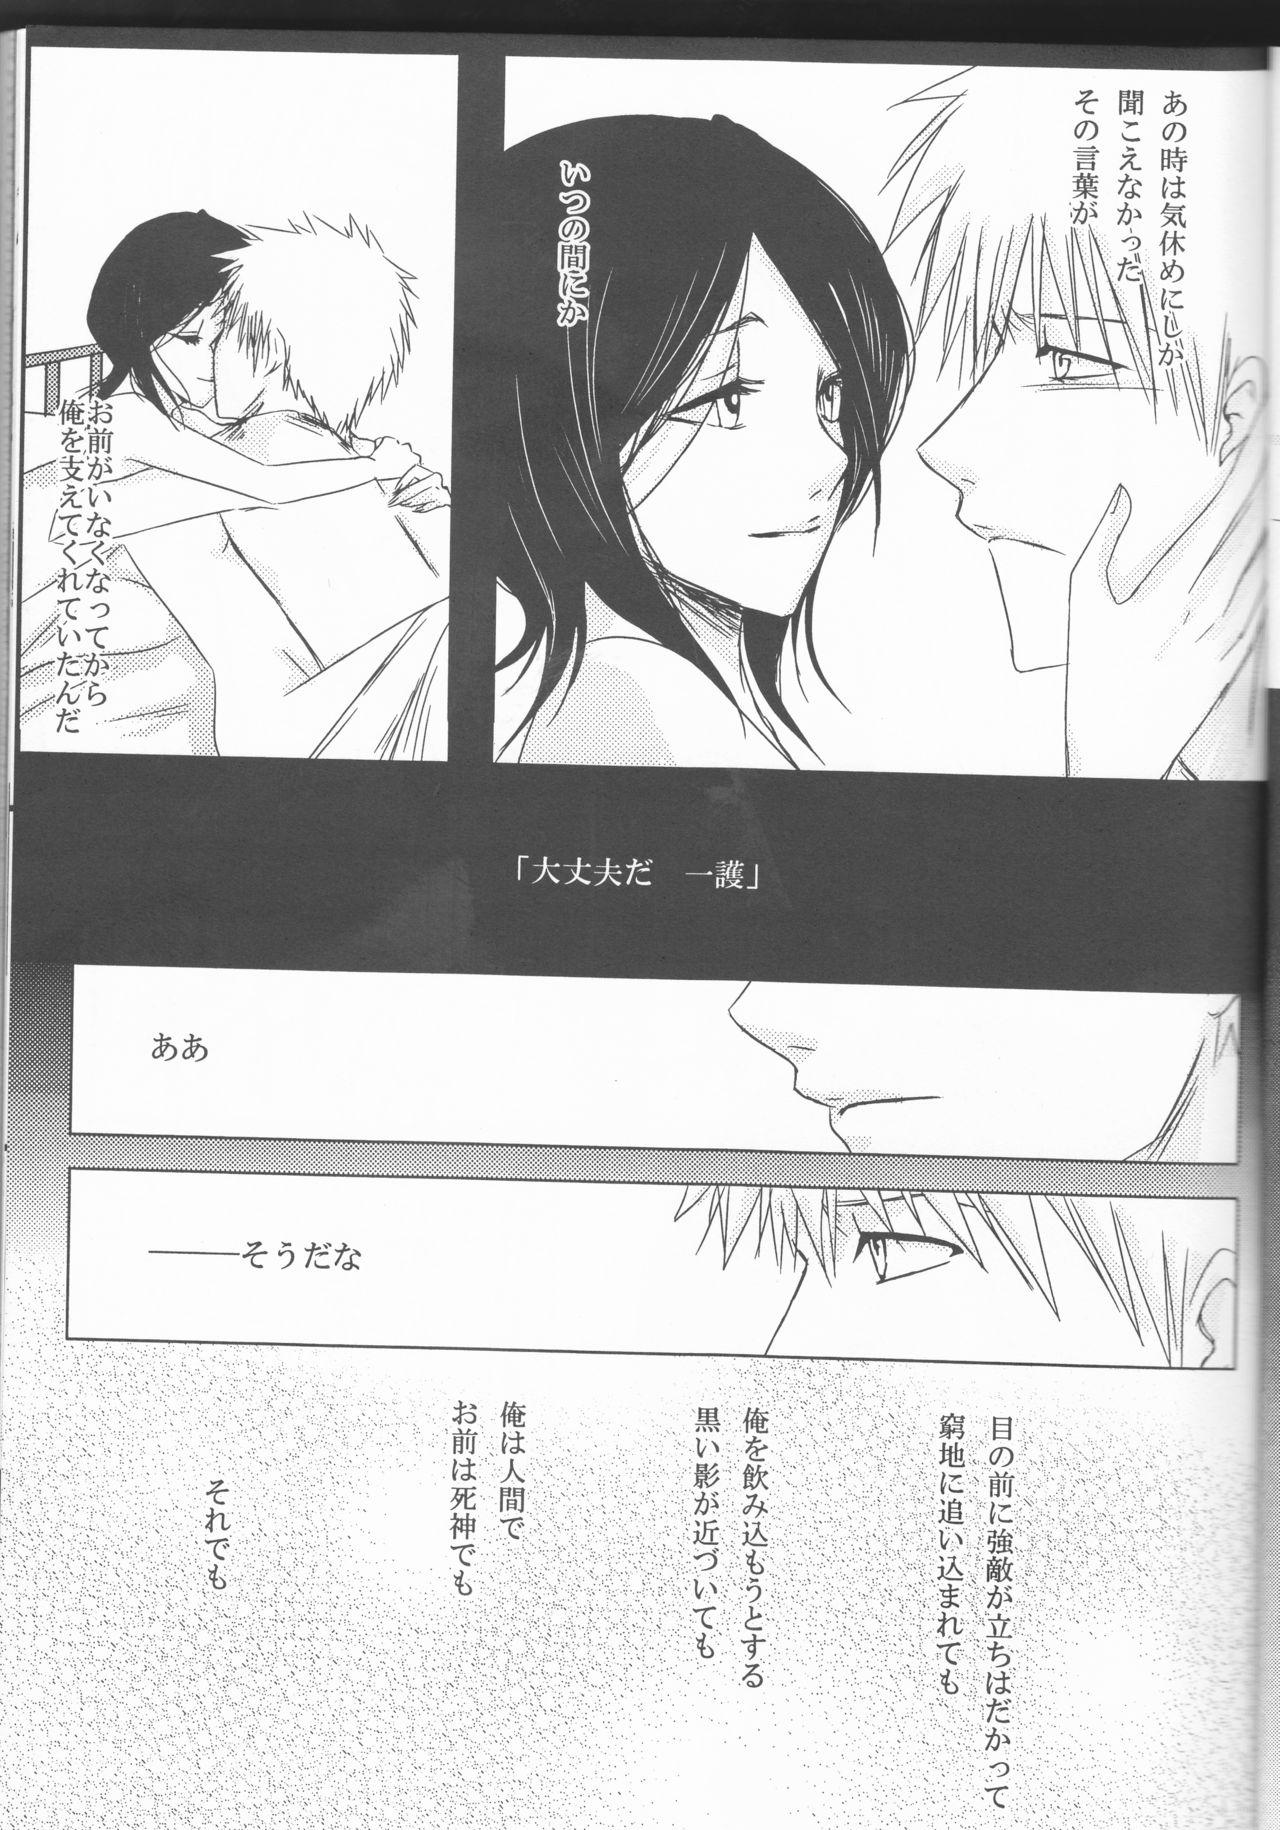 Couple Sex Neo Melodramatic 2][bleach) - Bleach Student - Page 9